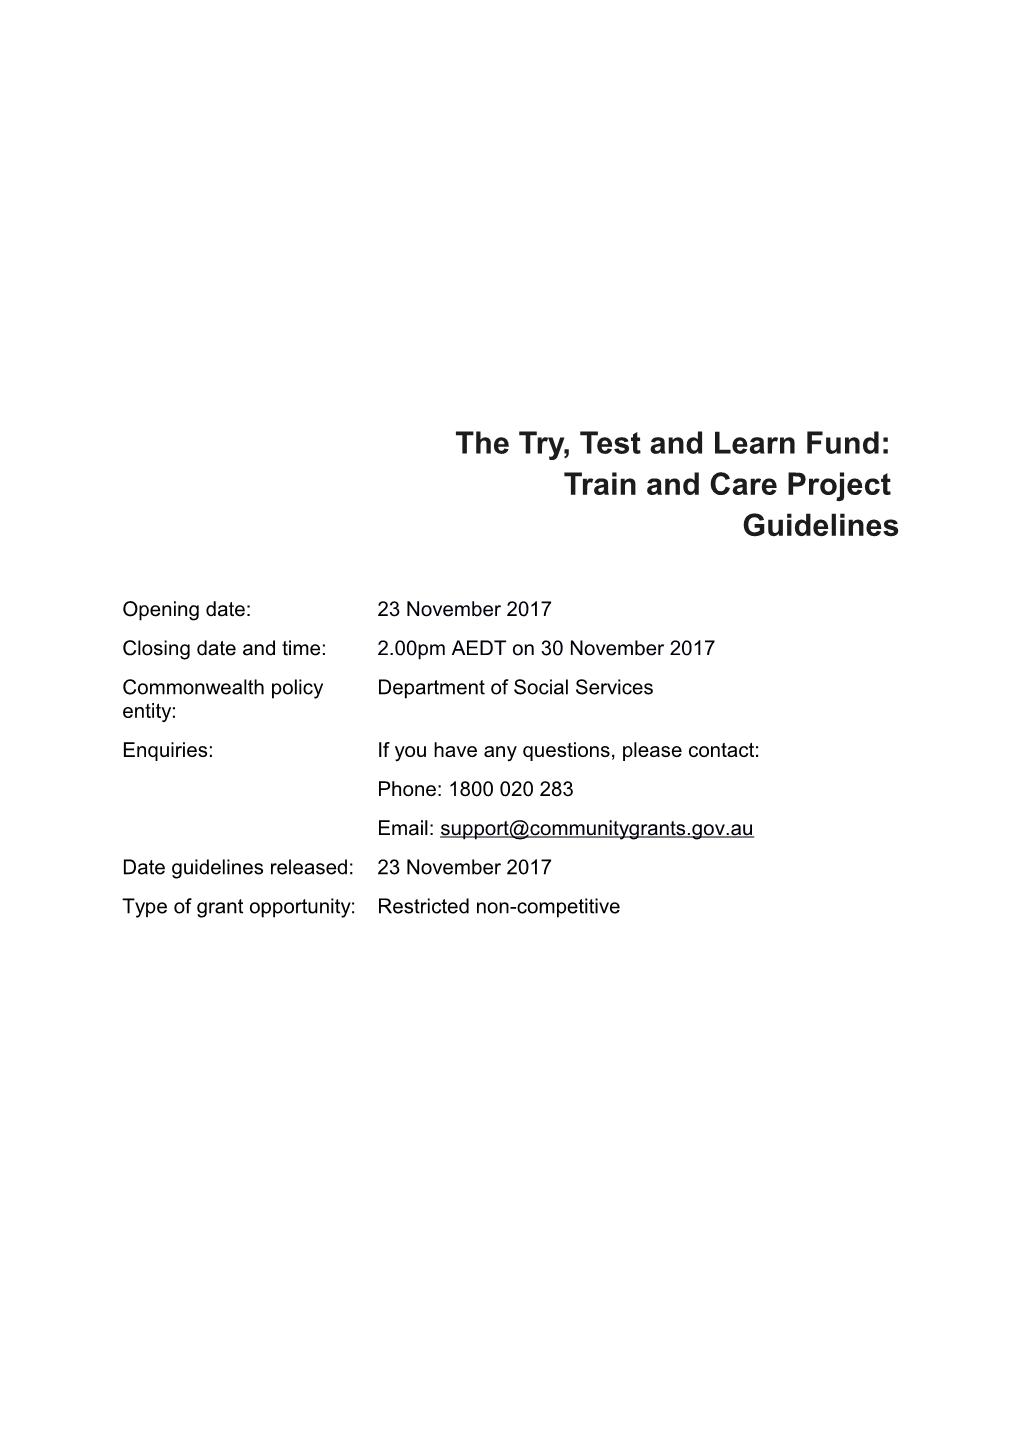 1.The Try, Test and Learn Fund: Train and Care Project Overview